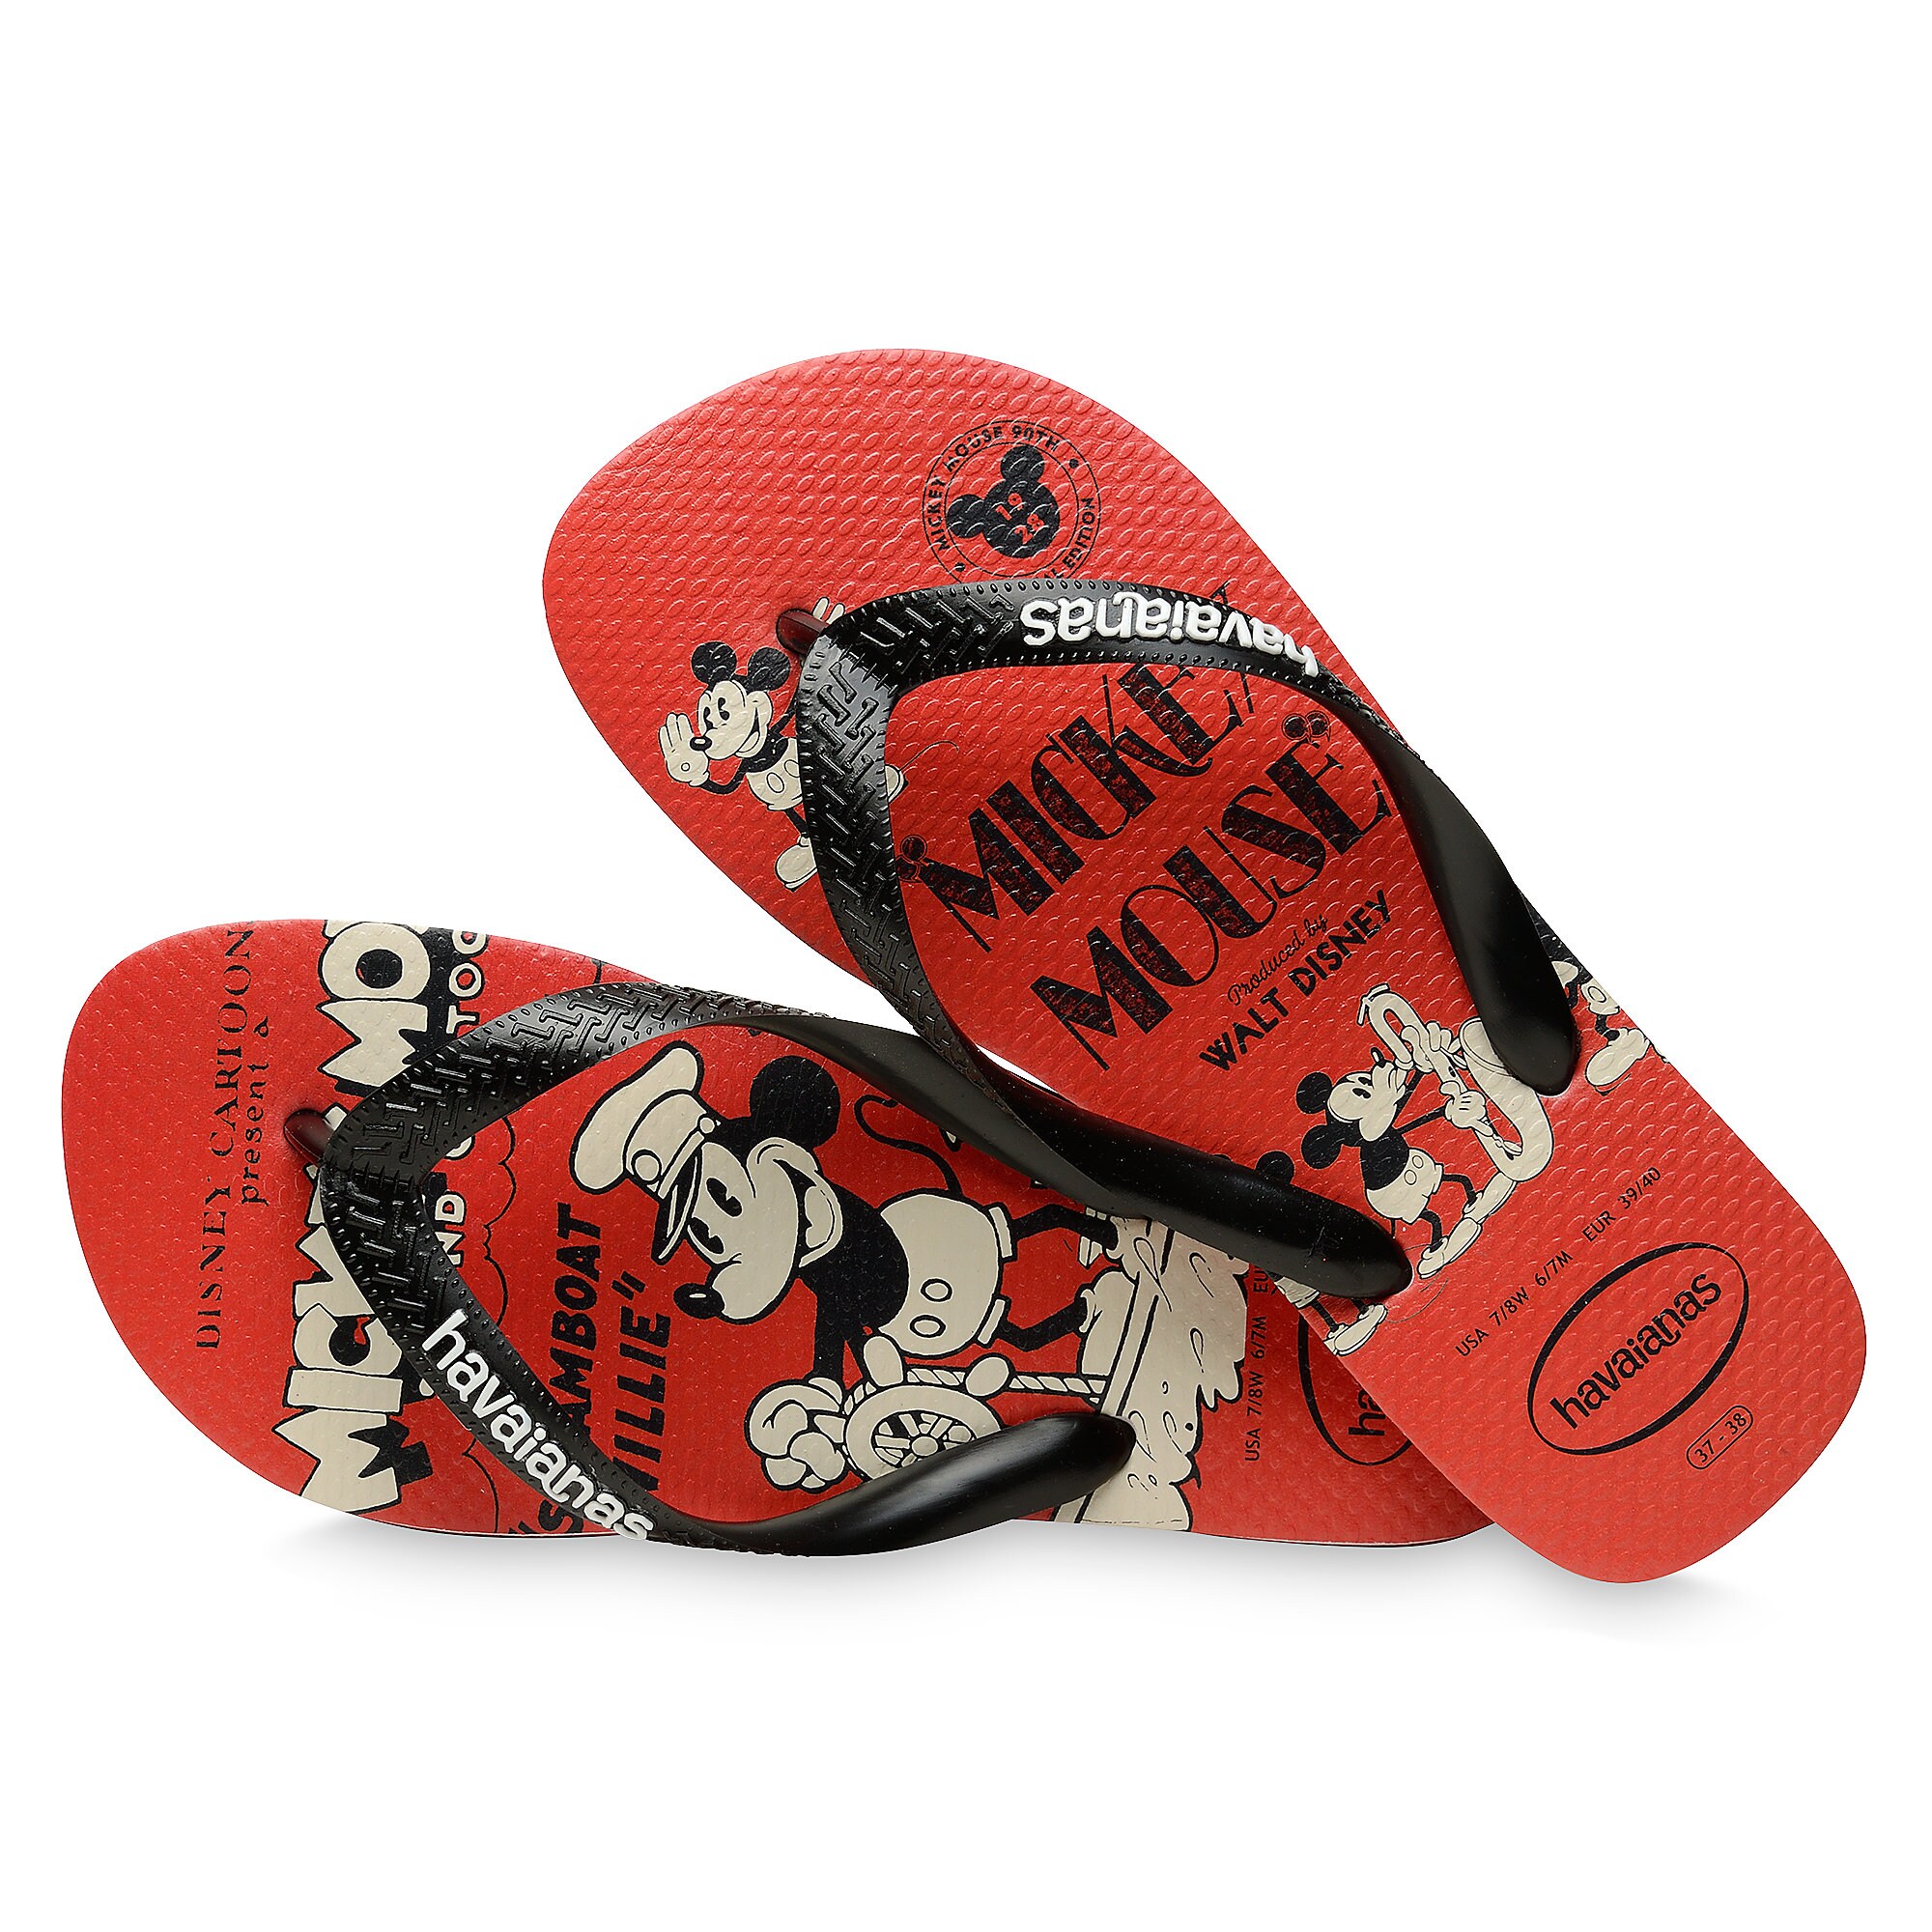 Mickey Mouse Steamboat Willie Flip Flops for Adults by Havaianas - 1920s